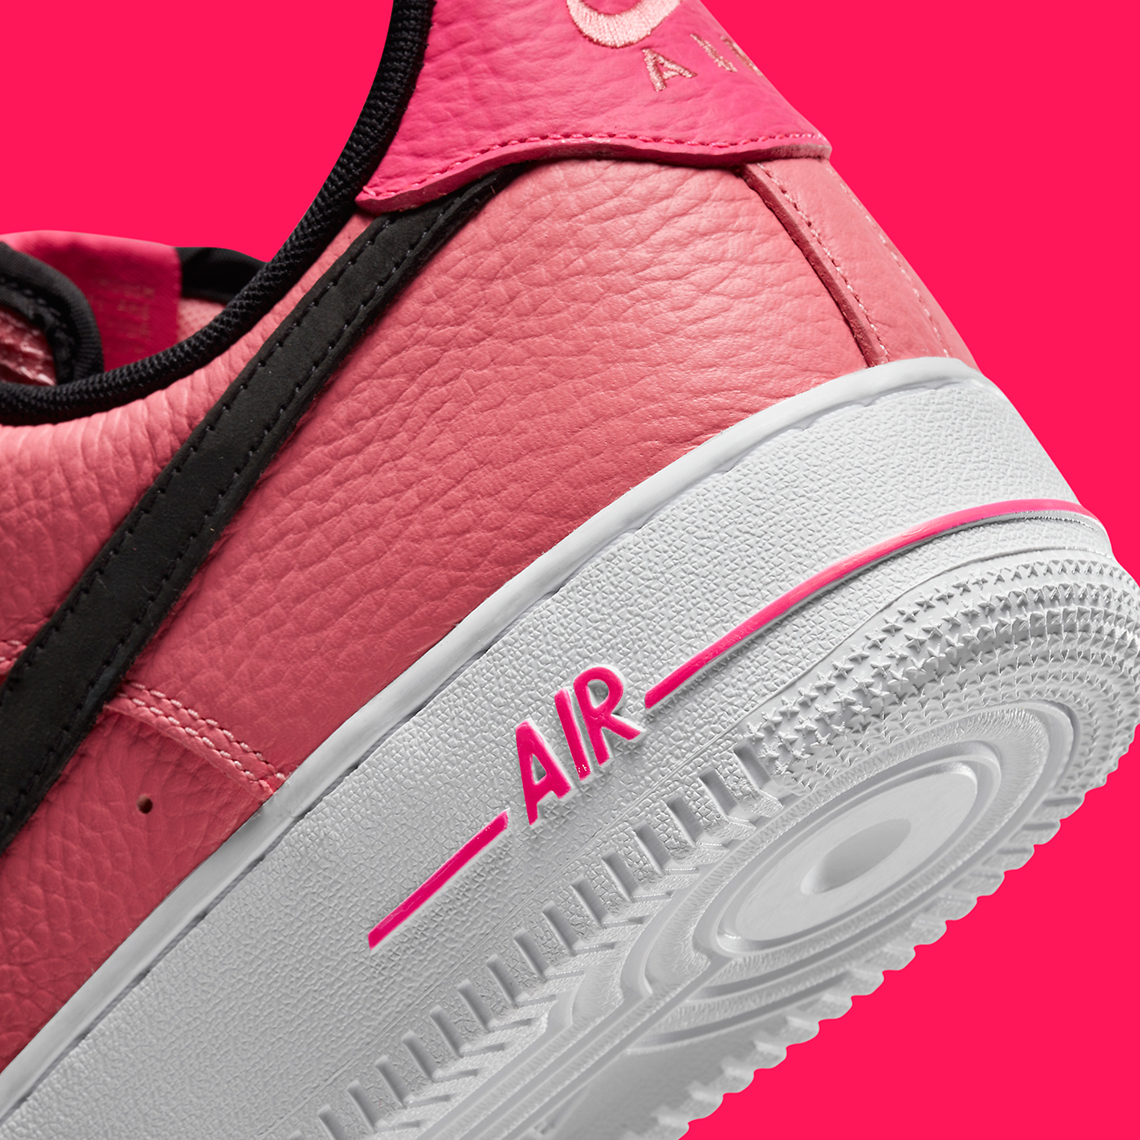 Nike Air Force 1 Low Pink Tumbled Leather Dz4861 600 8